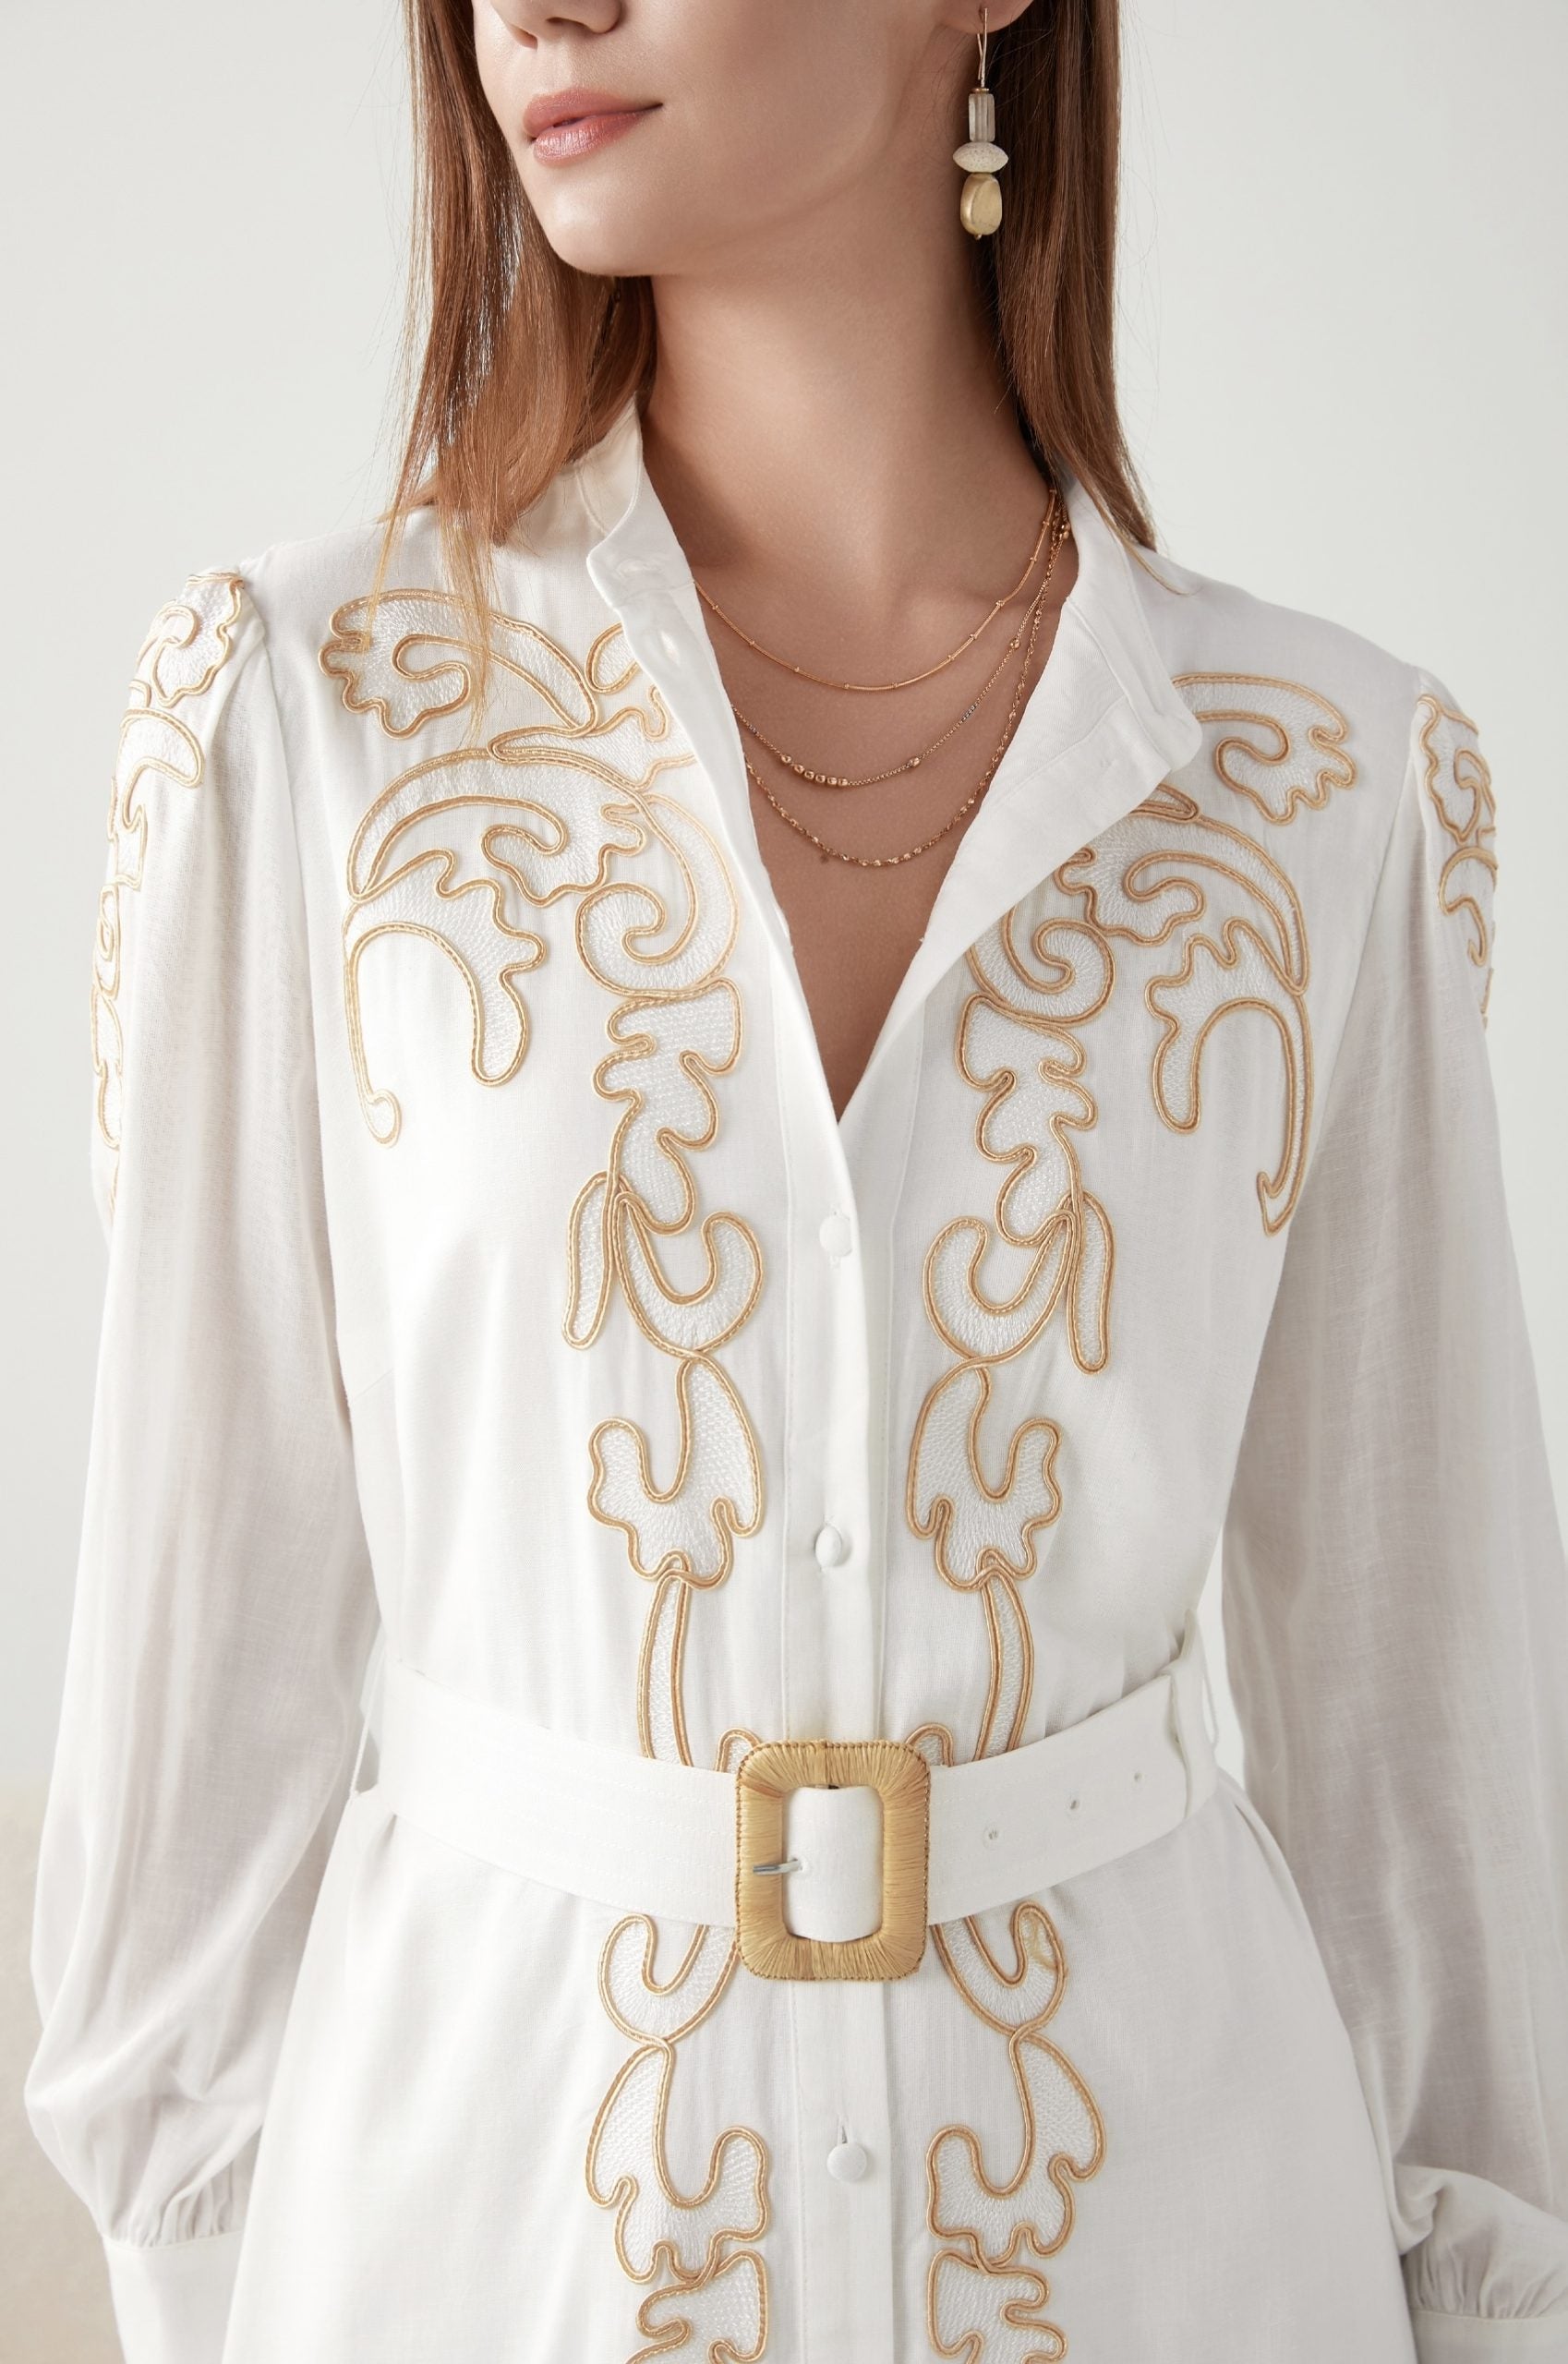 &quot;Embrace sophistication: White dress with exquisite embroidery. Get yours today!&quot;